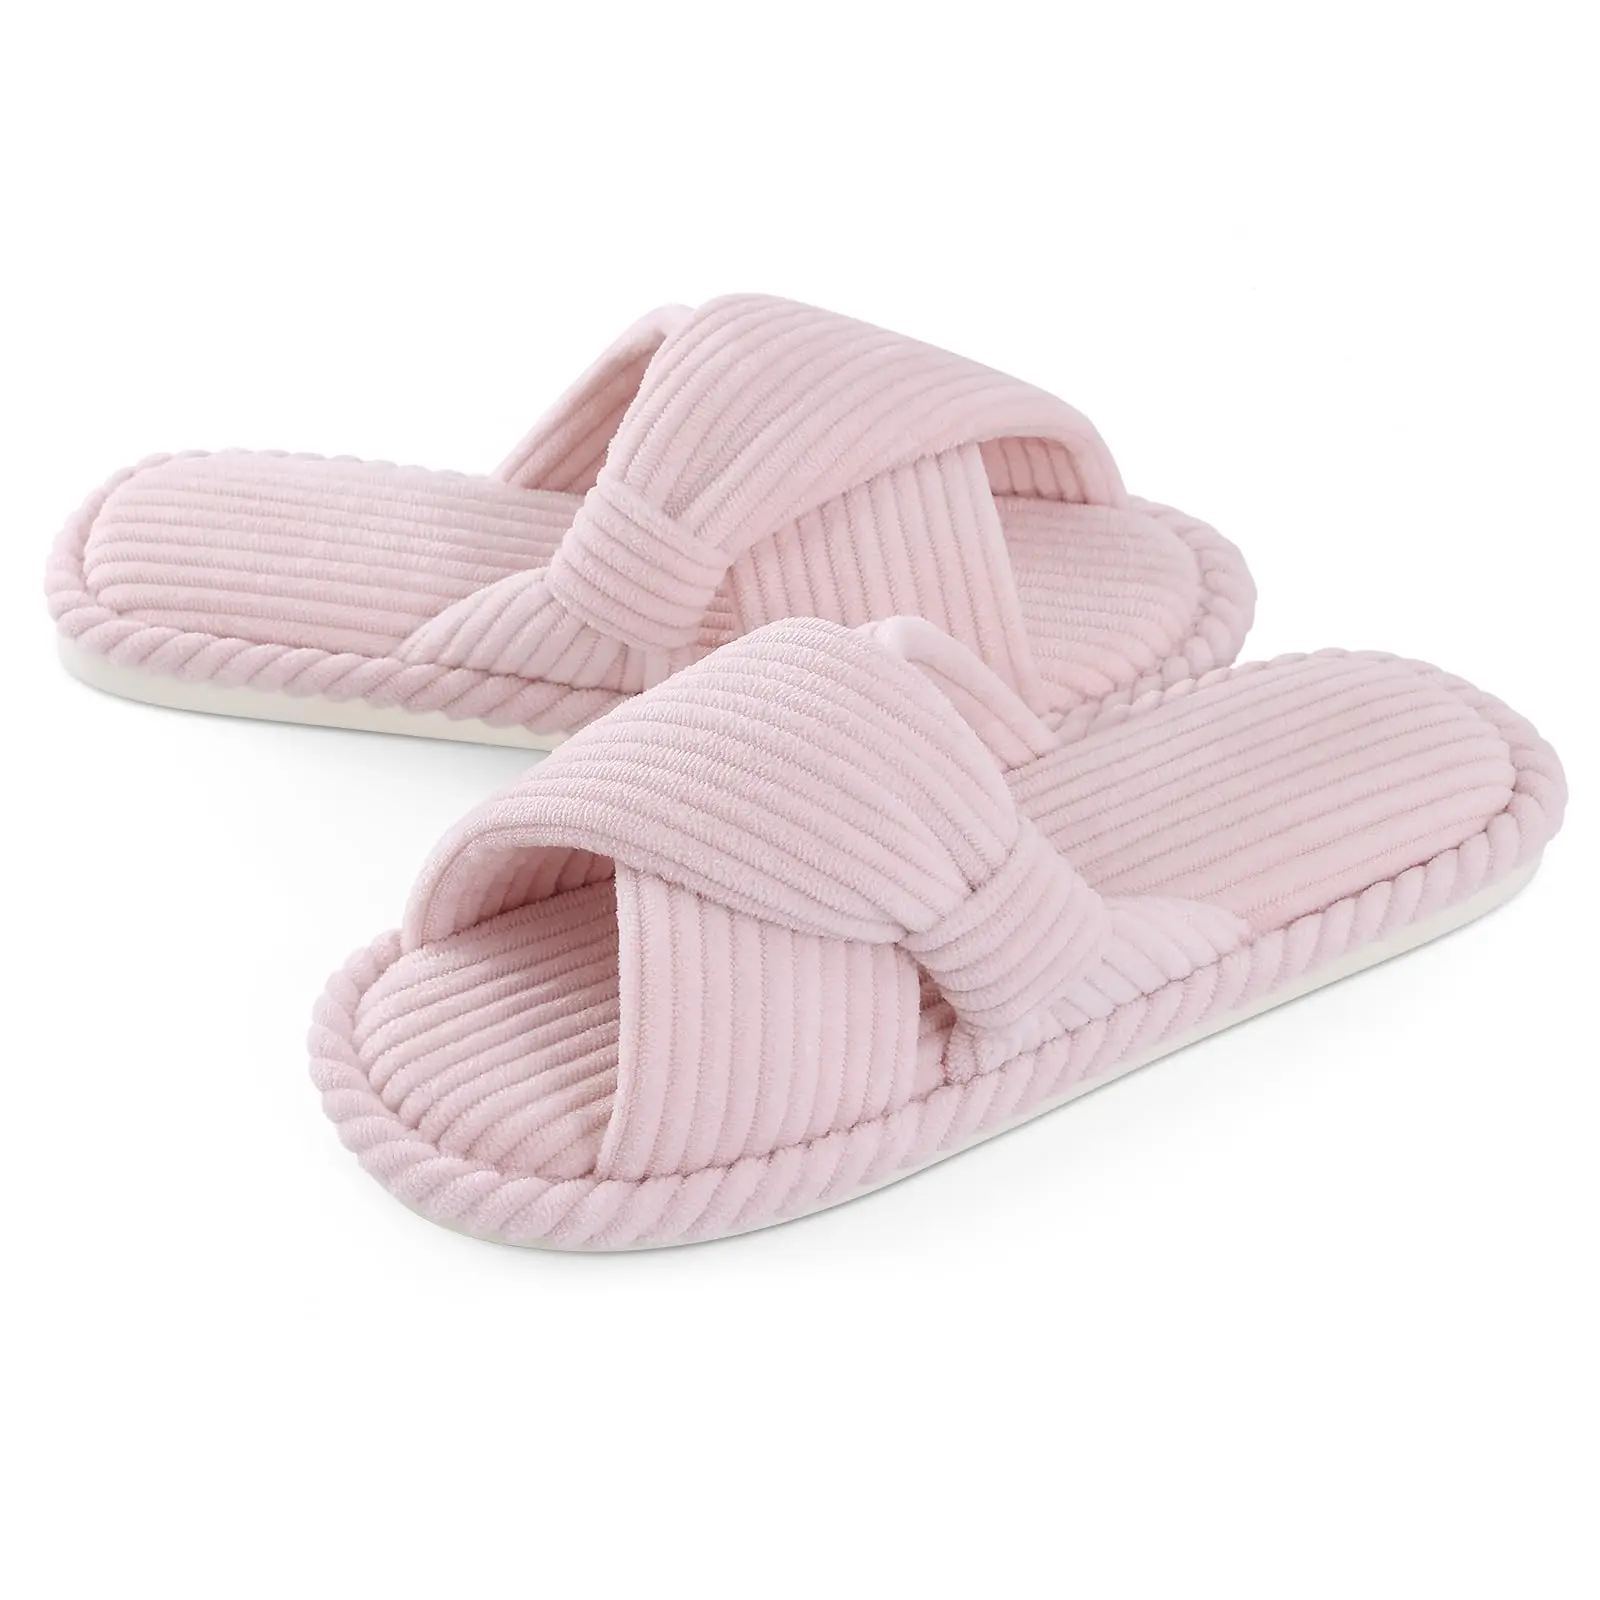 

Eyriphy Women Corduroy Cross Bow Home Slippers Comfort Soft Sole Warm Cotton Slippers Anti-Slip Memory Foam Bedroom Slide Indoor